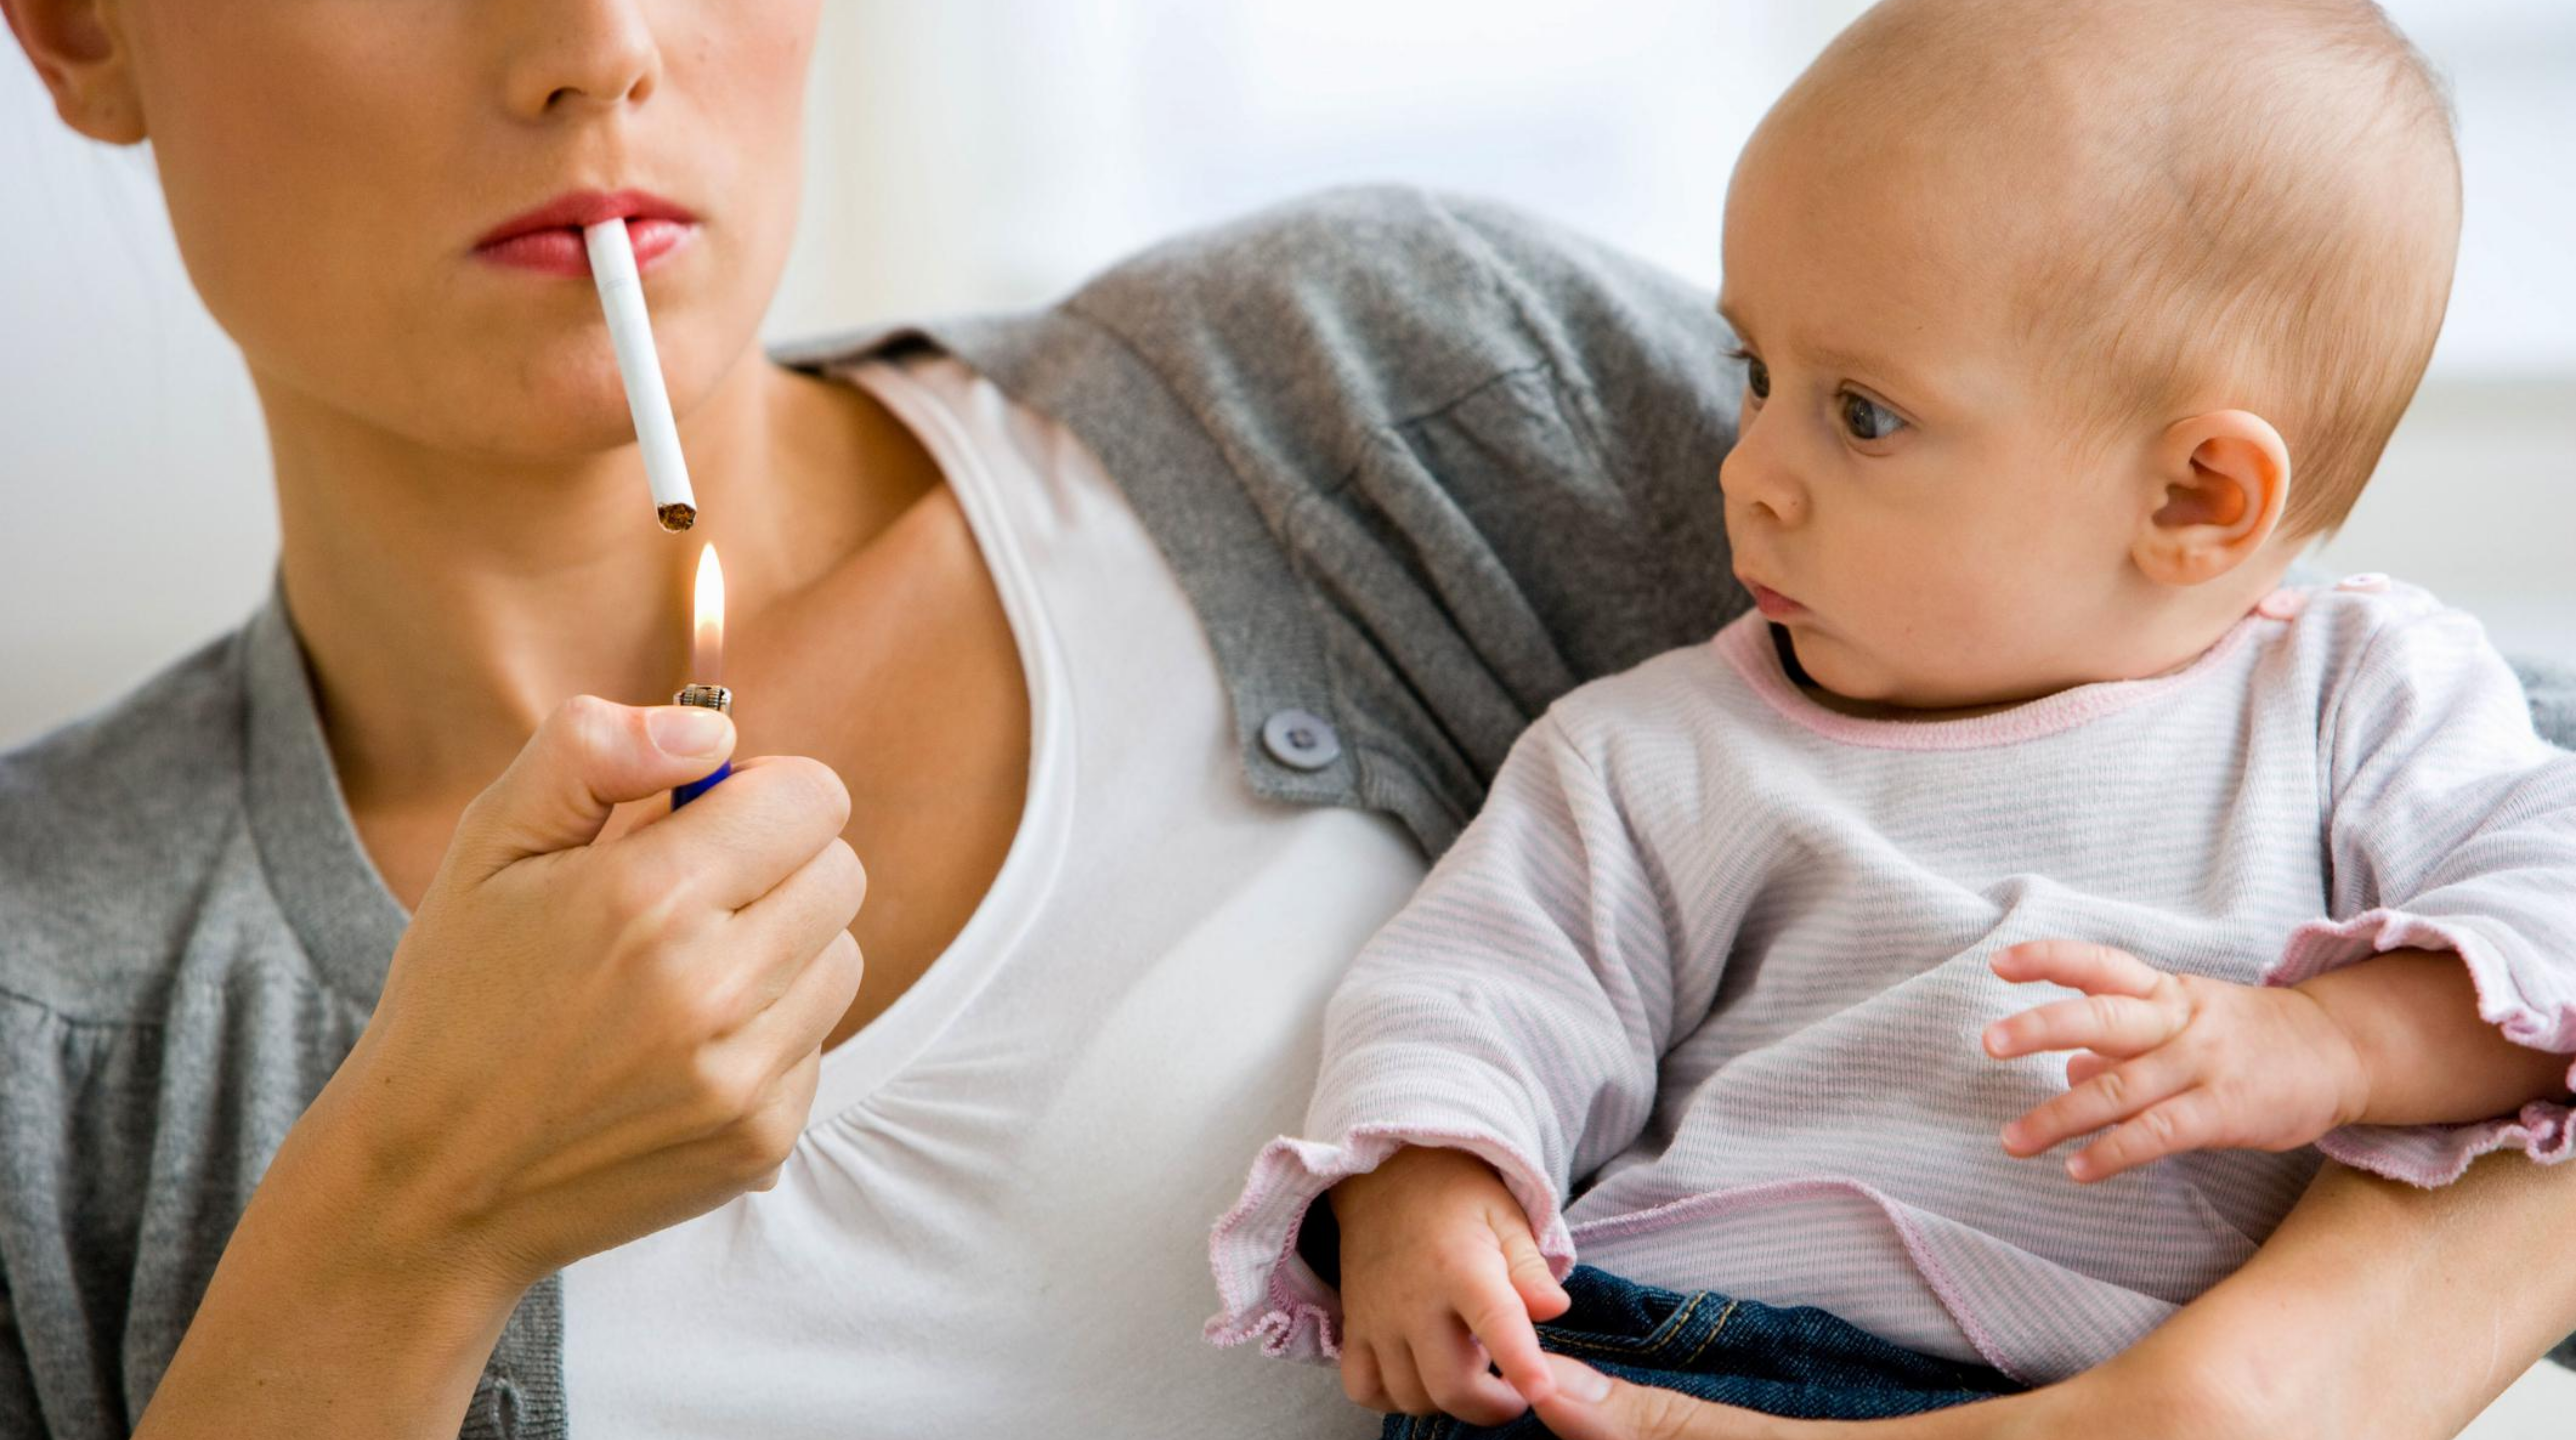 Protecting your child from smoking